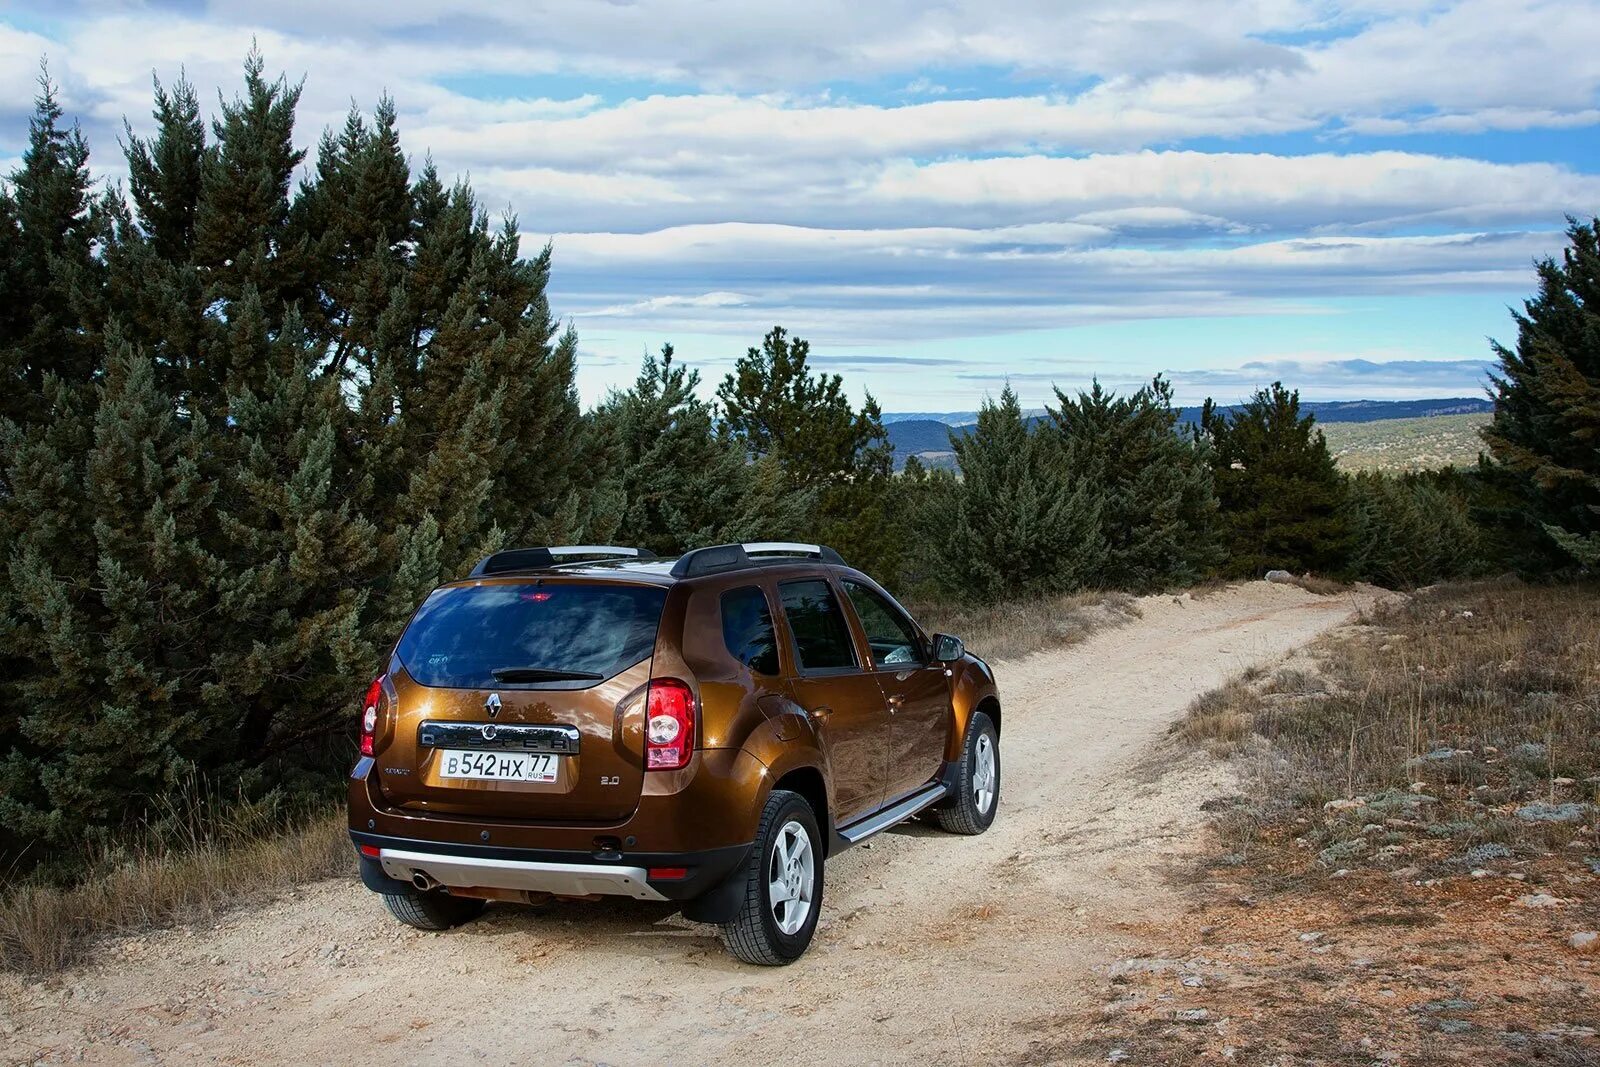 Renault Duster 1. Renault Duster 2. Рено Дастер 1.6. Рено Дастер 4х4.